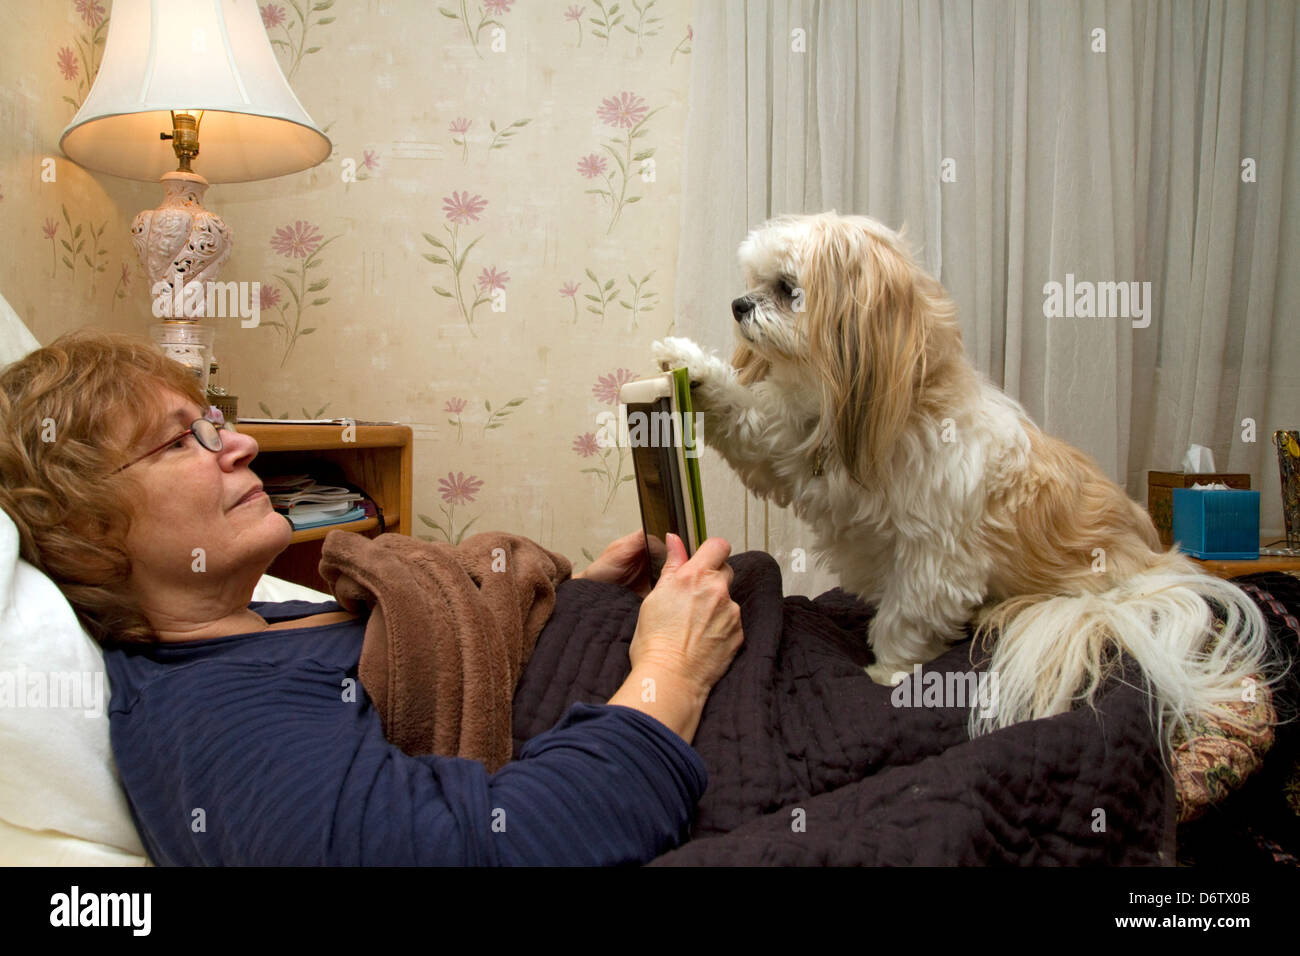 Woman reading on electronic tablet with dog wanting attention in Boise, Idaho, USA. MR Stock Photo